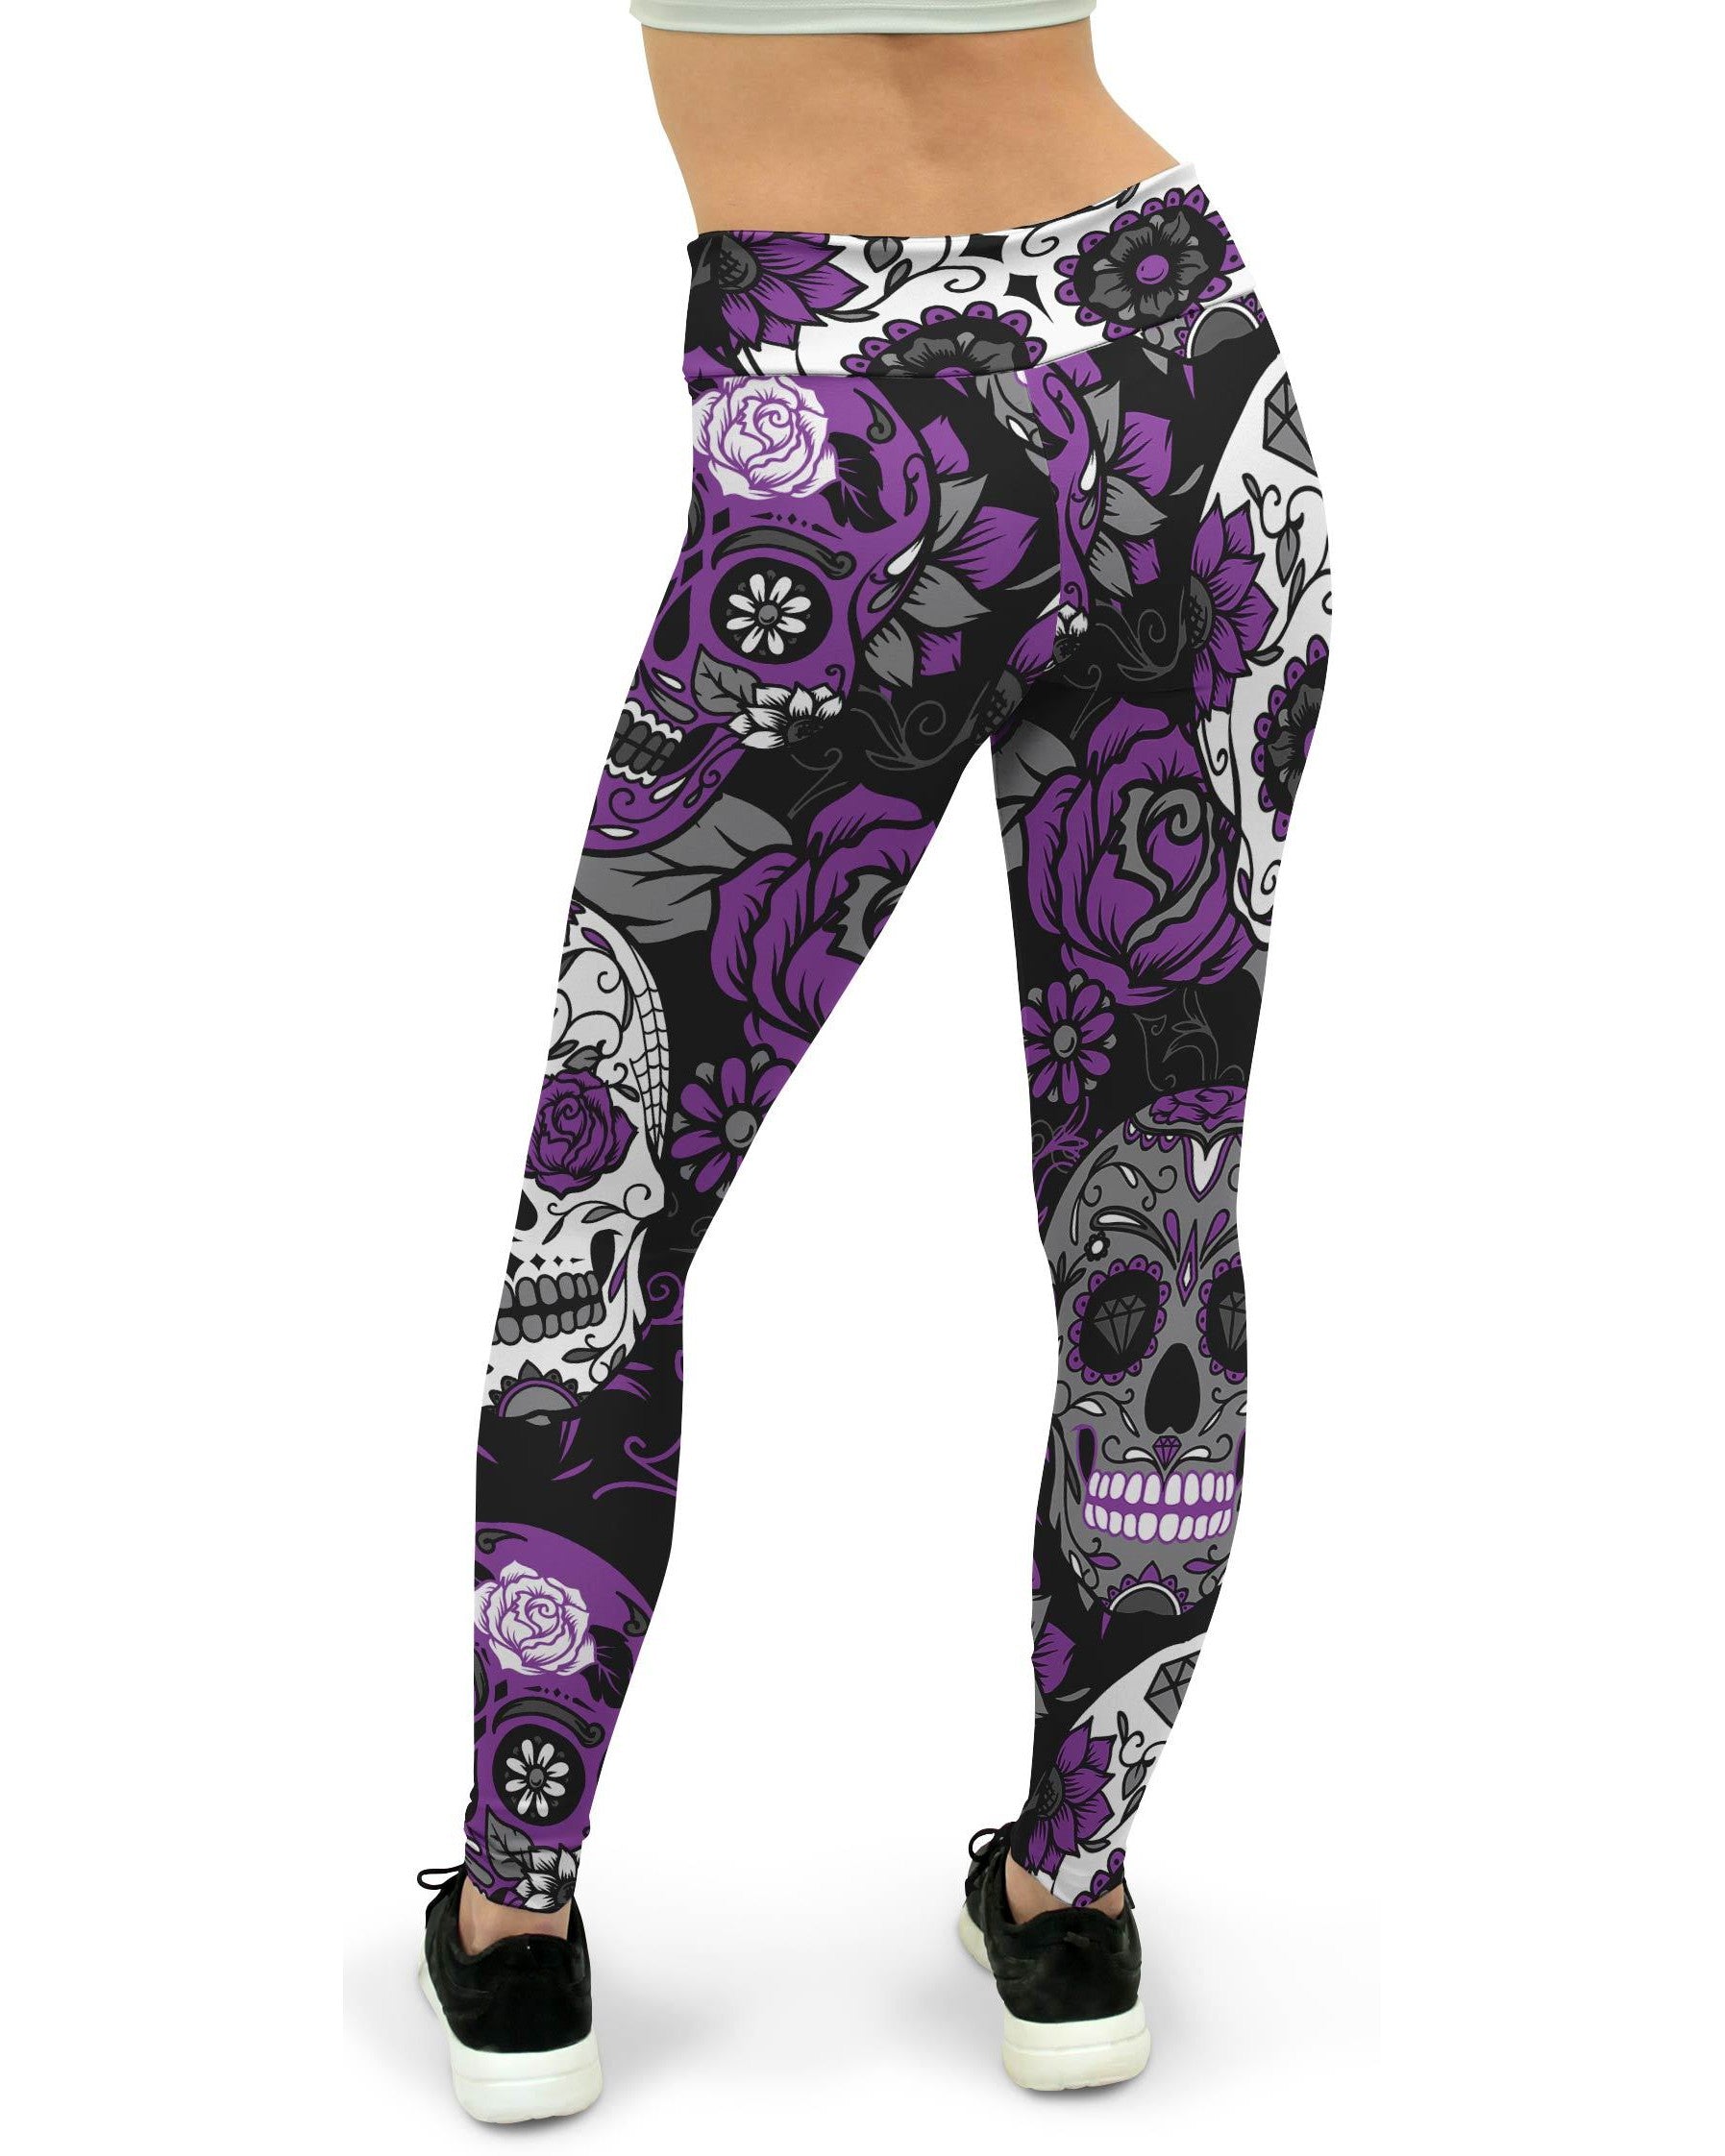 15 Minute Sugar skull workout pants for push your ABS